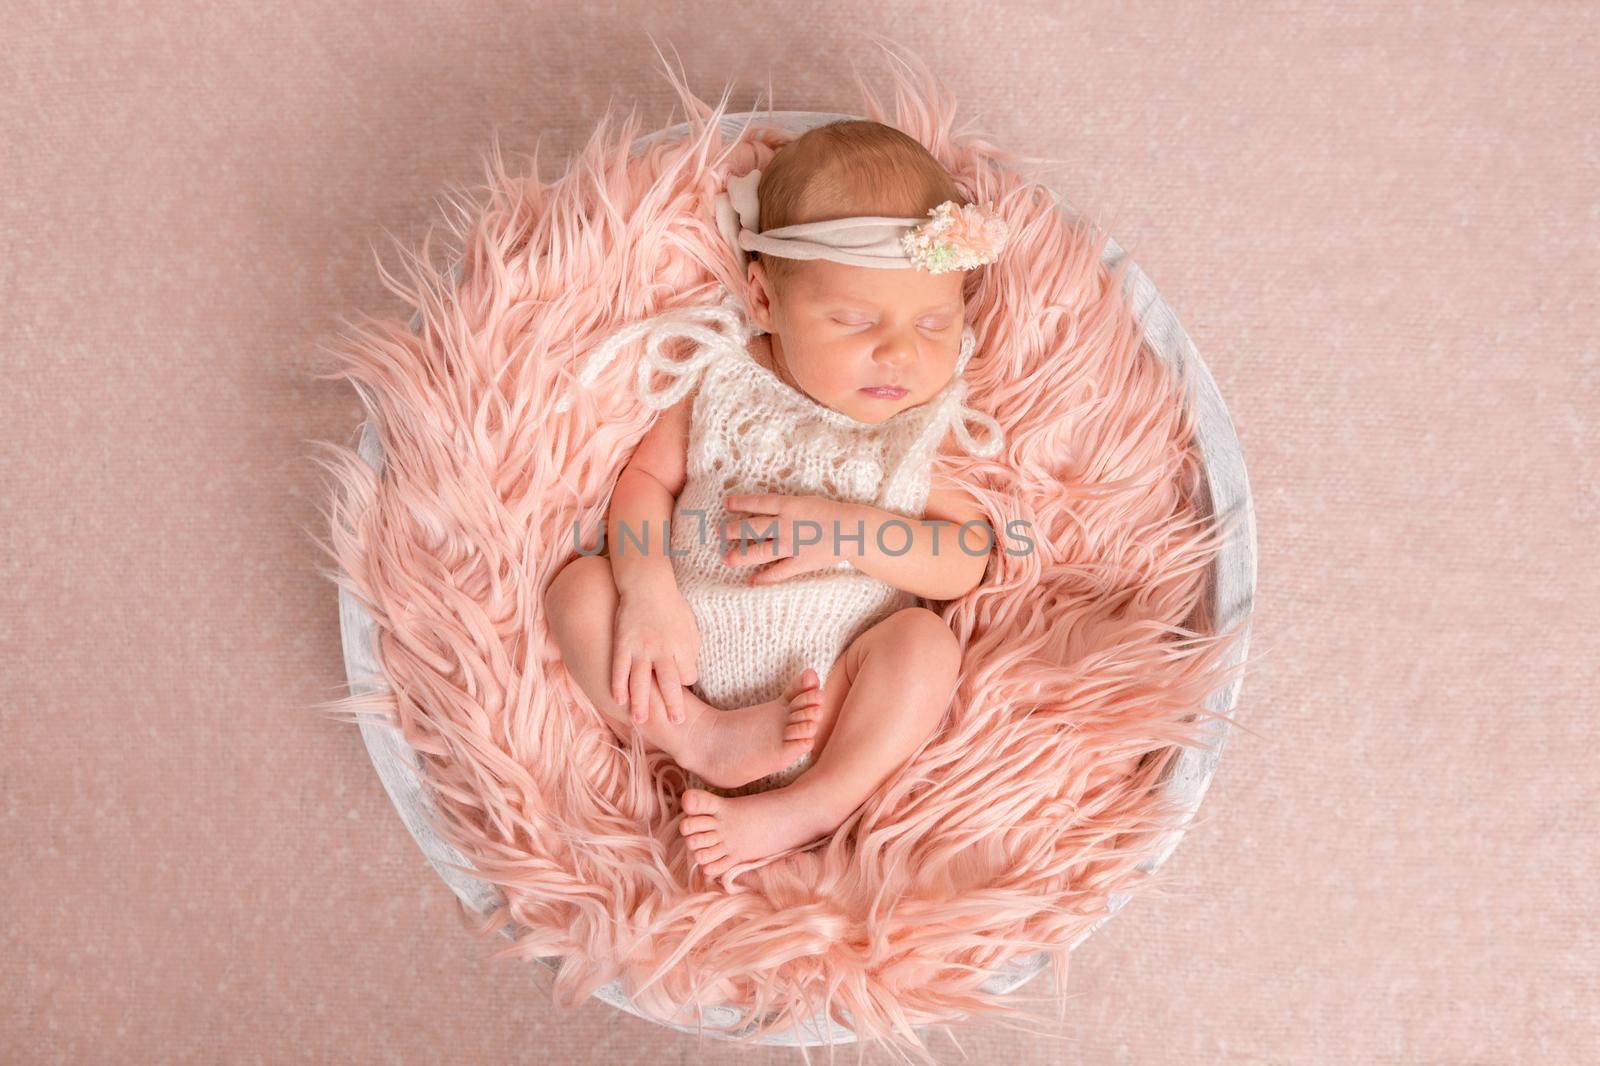 sweet newborn girl in white romper sleeping on round cot with fluffy blanket, top view